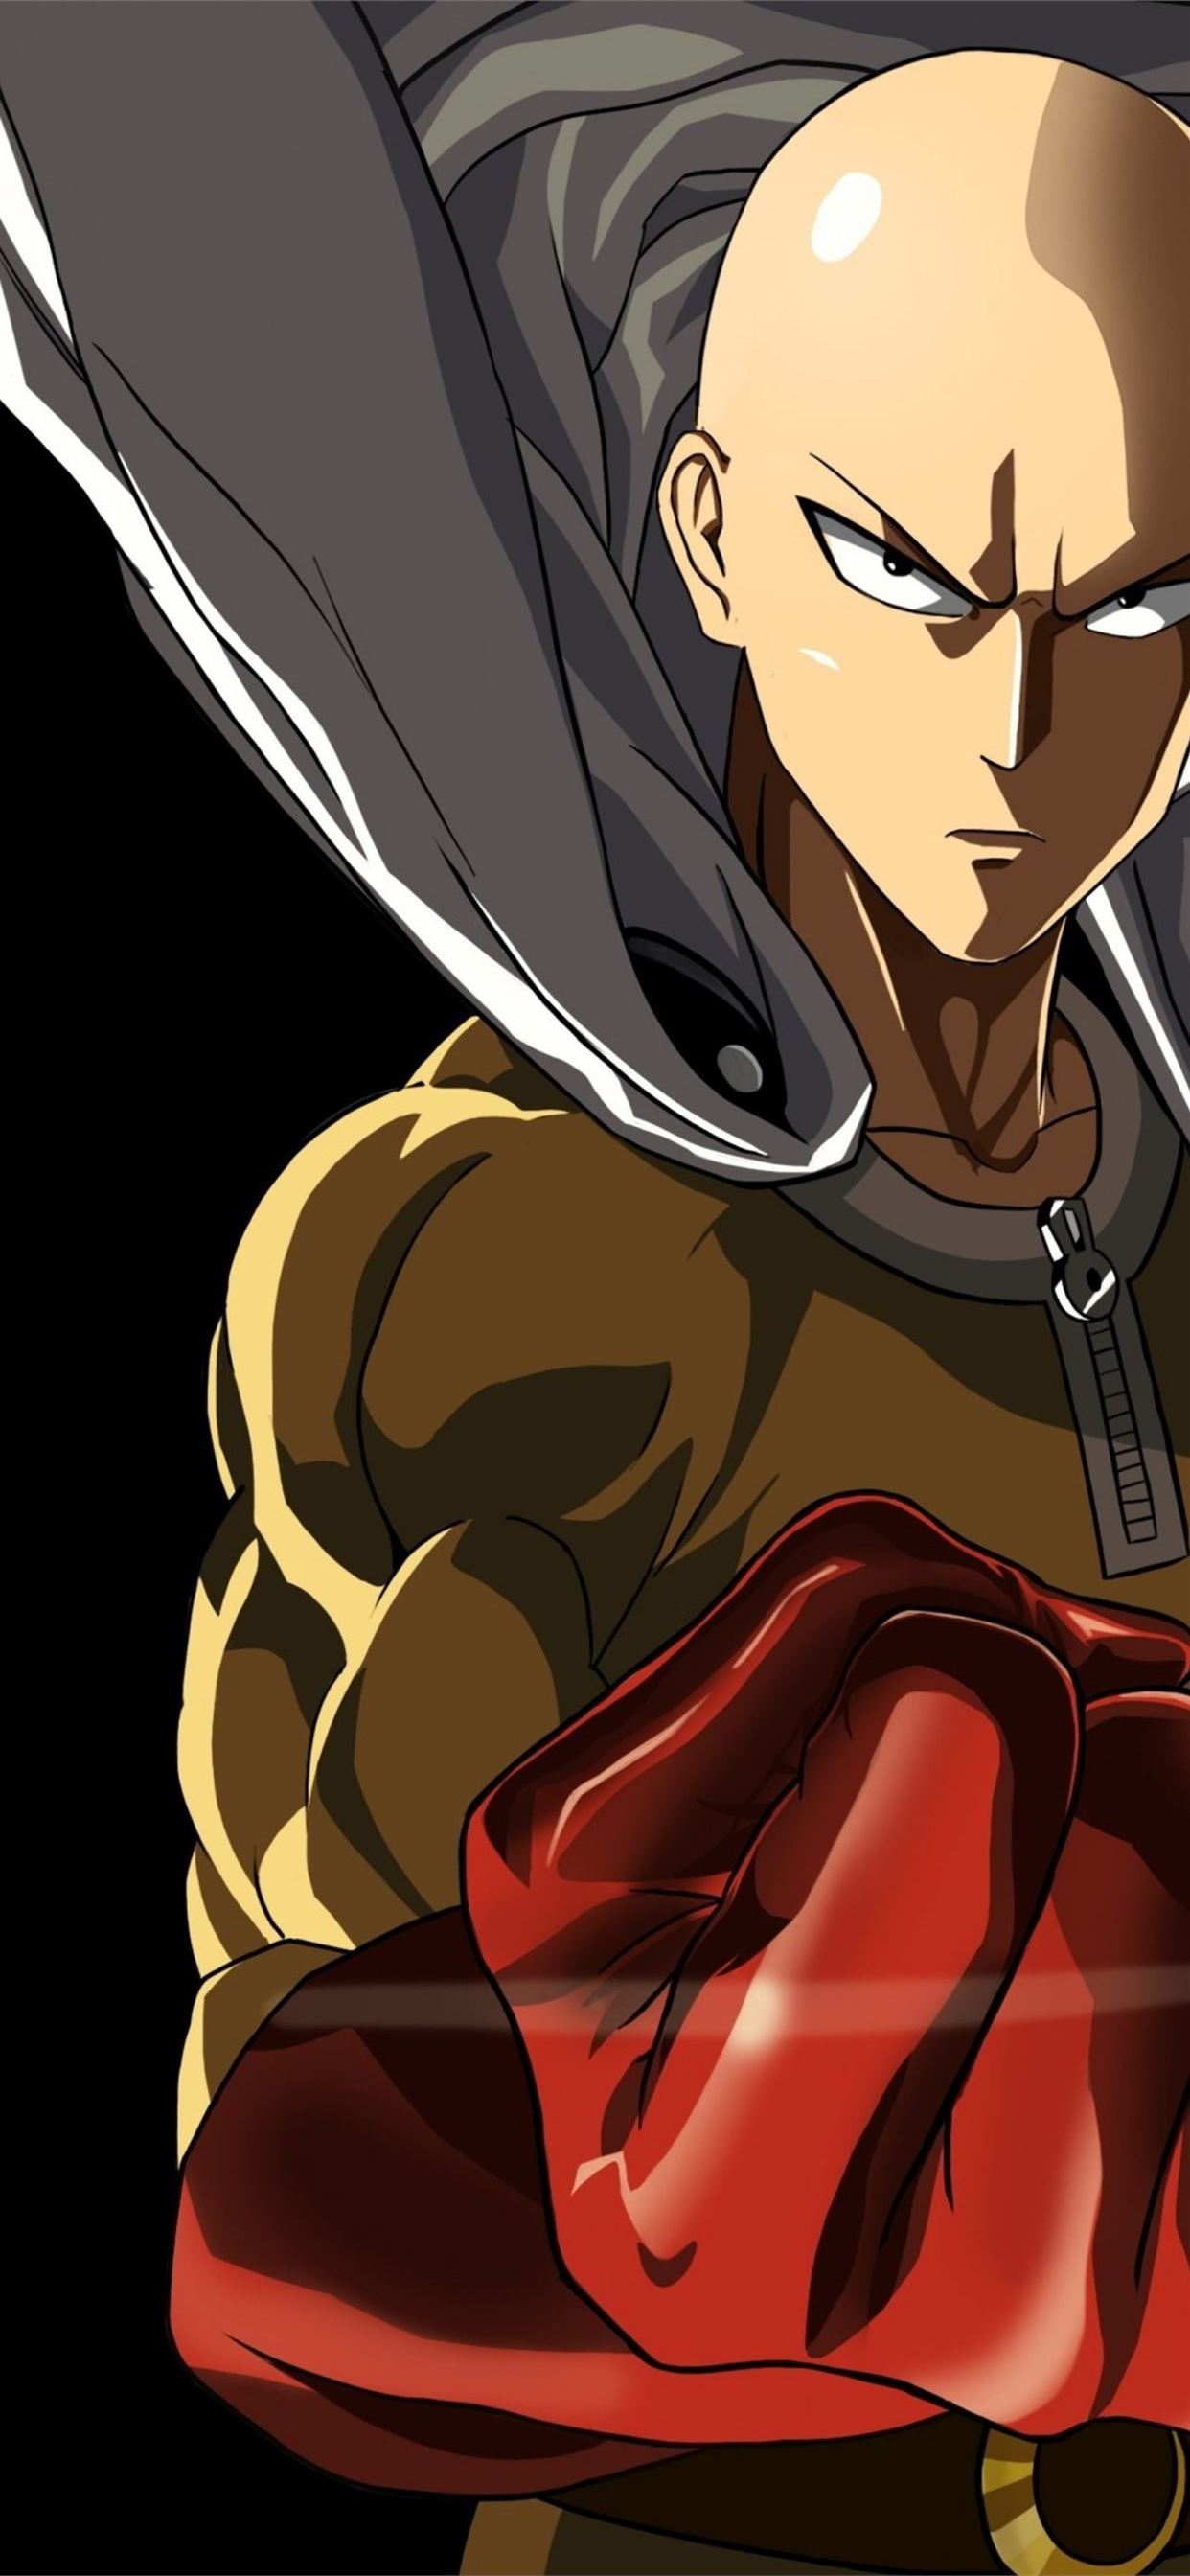 Saitama One Punch Man Cape Fist for Samsung Galaxy... iPhone Wallpapers  Free Download